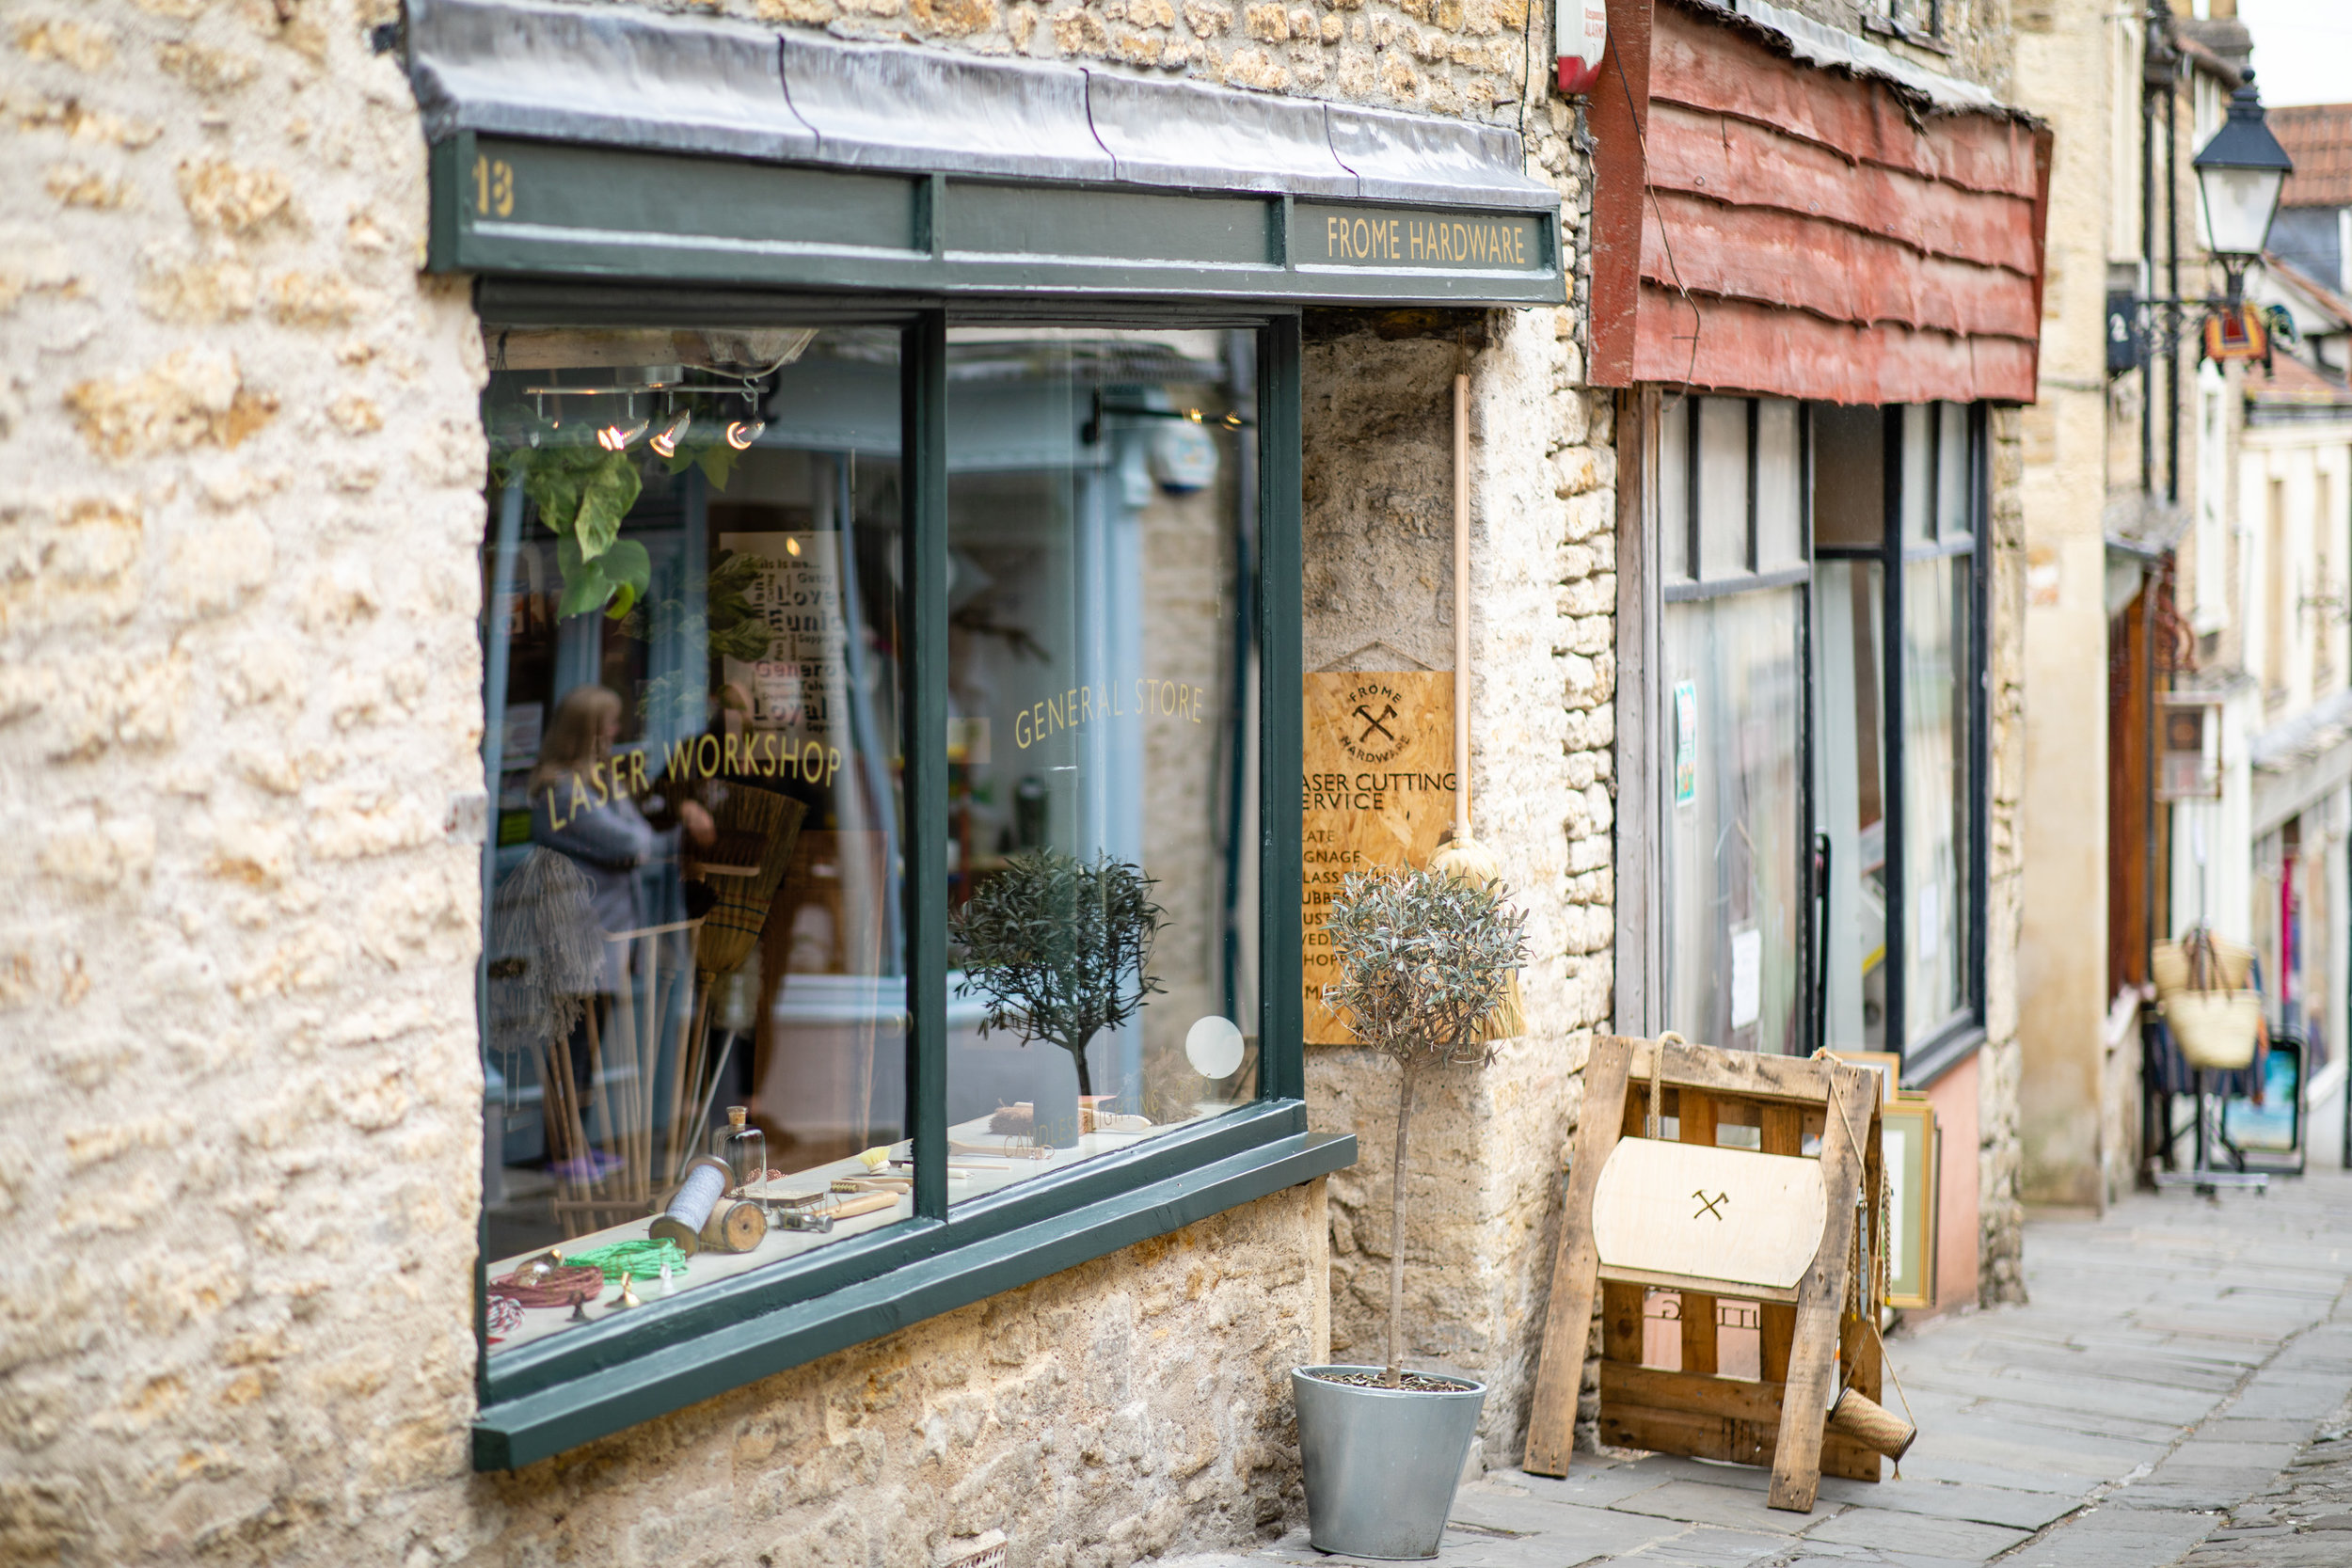 We will visit 3 gorgeous independent stores to meet the owners & shop - Kobi & Teal, Frome Hardware and Resident